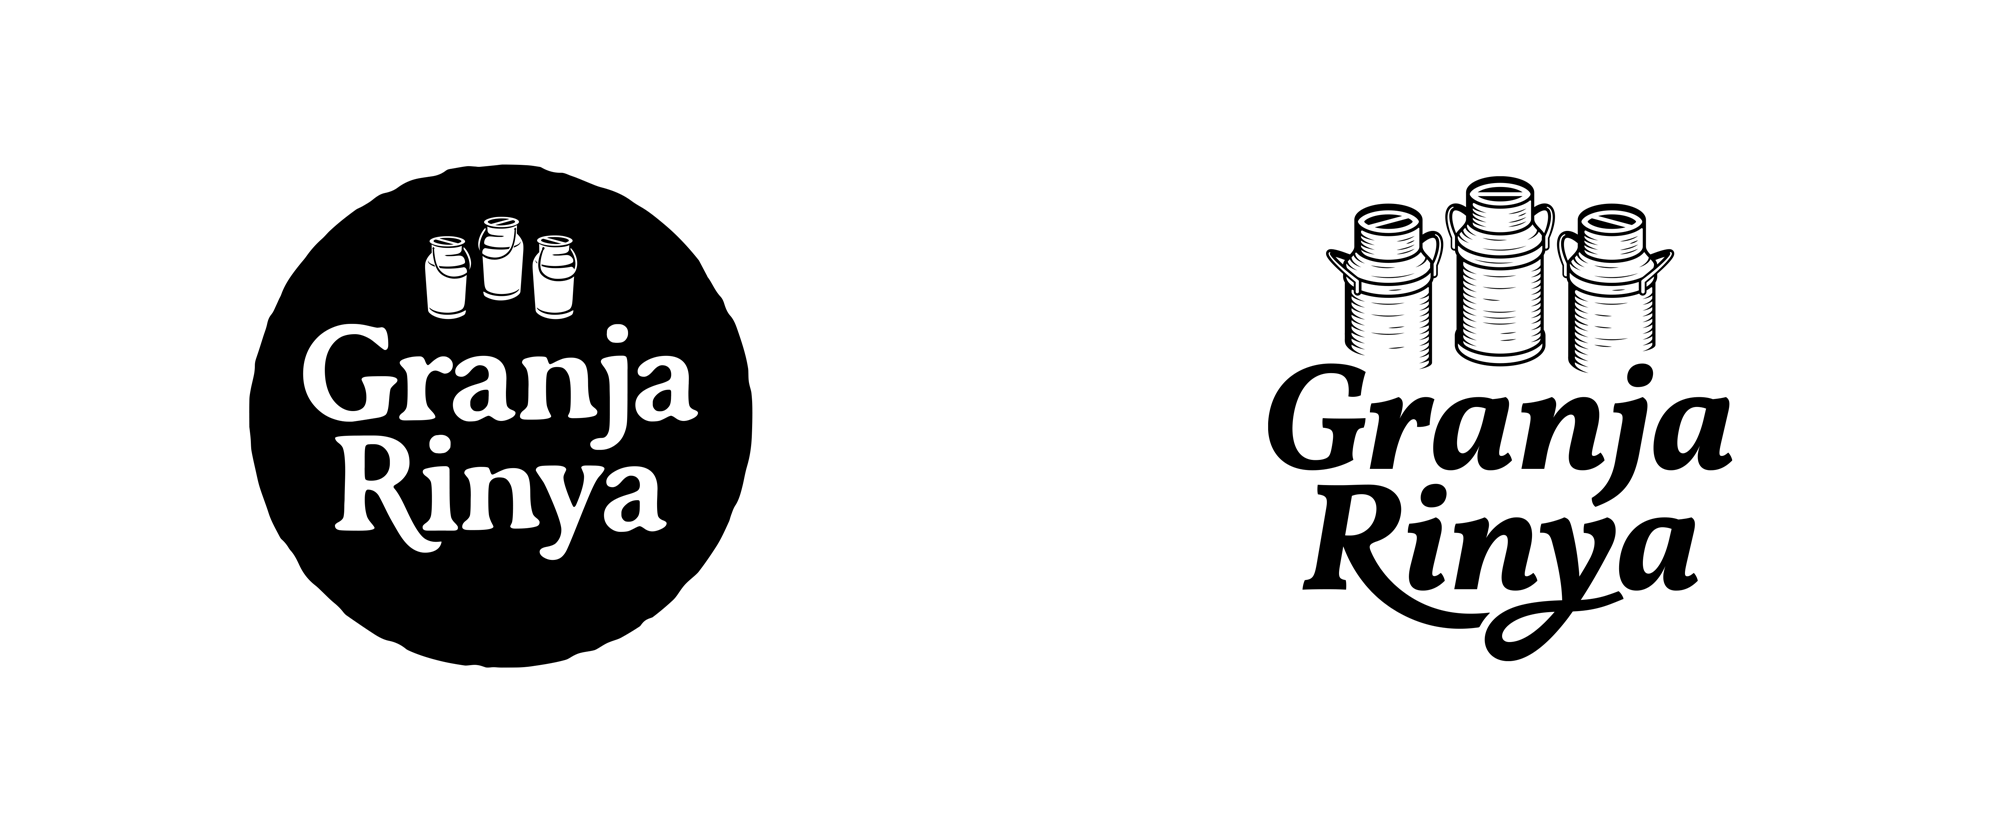 New Logo and Packaging for Granja Rinya by Small